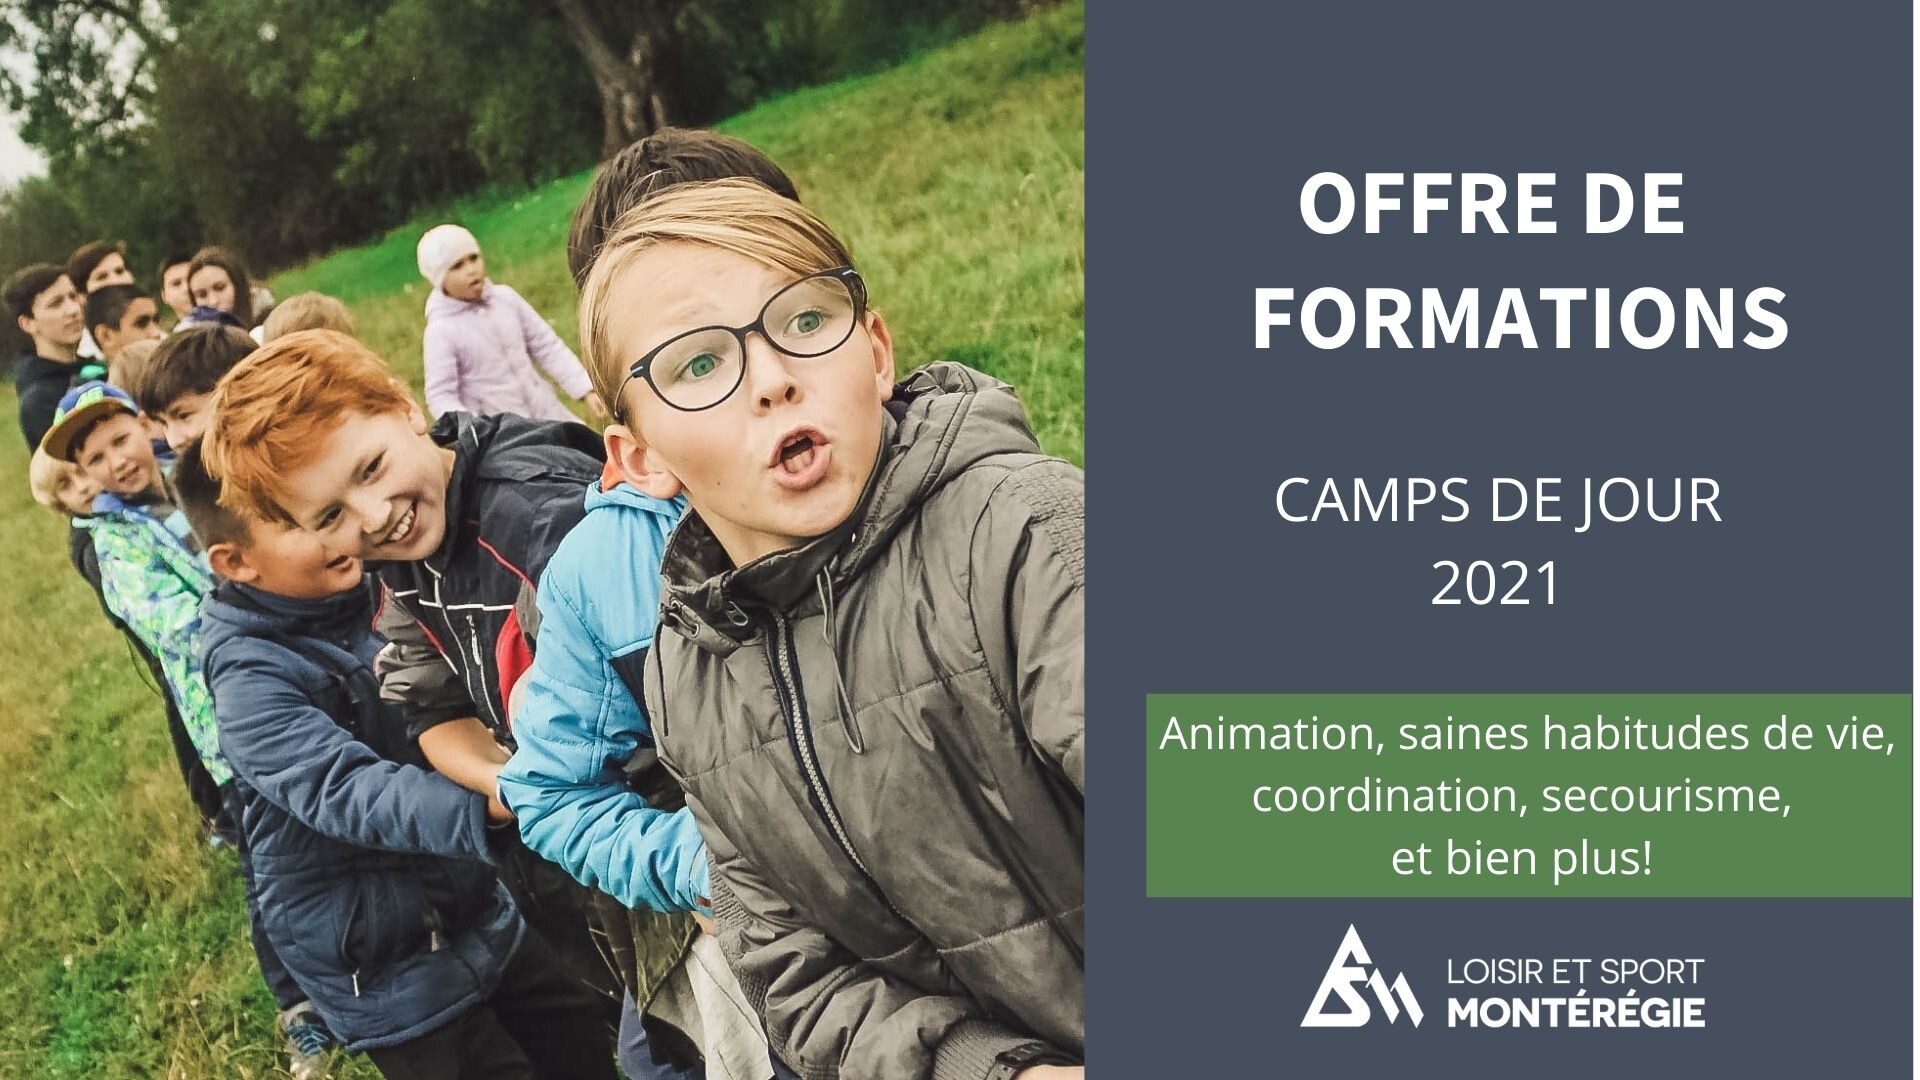 Offre formations camps jour